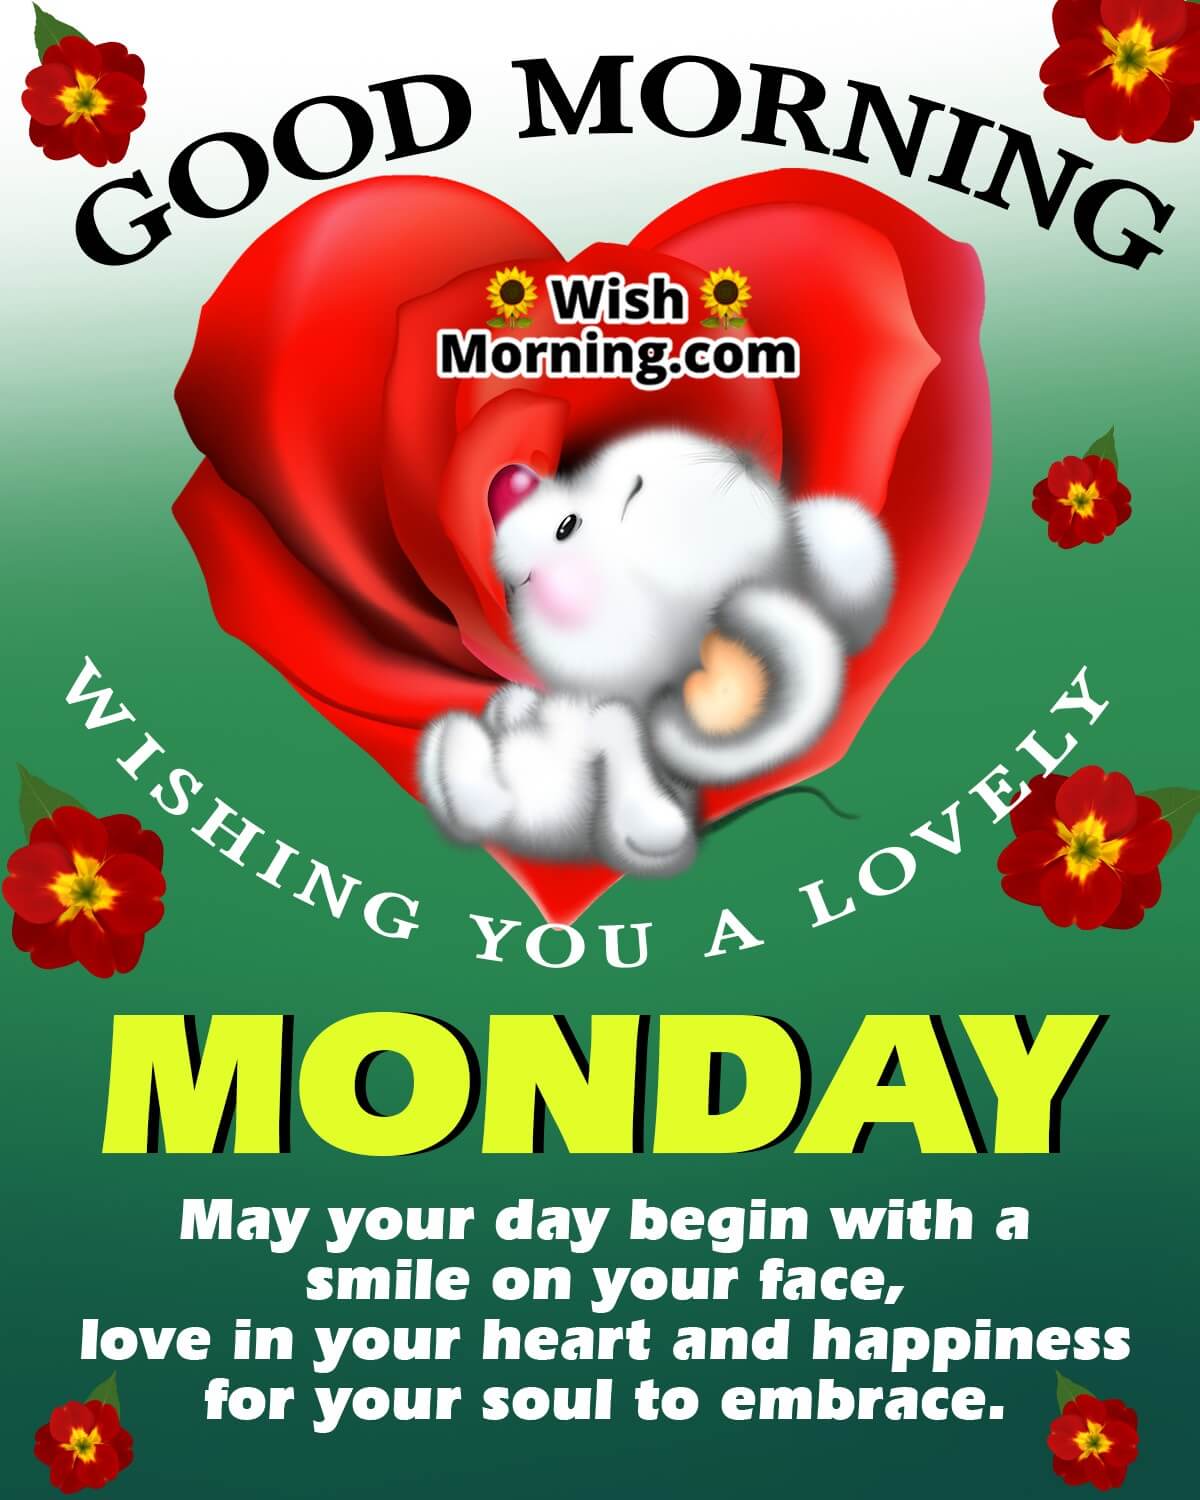 Good Morning Wishing You A Lovely Monday